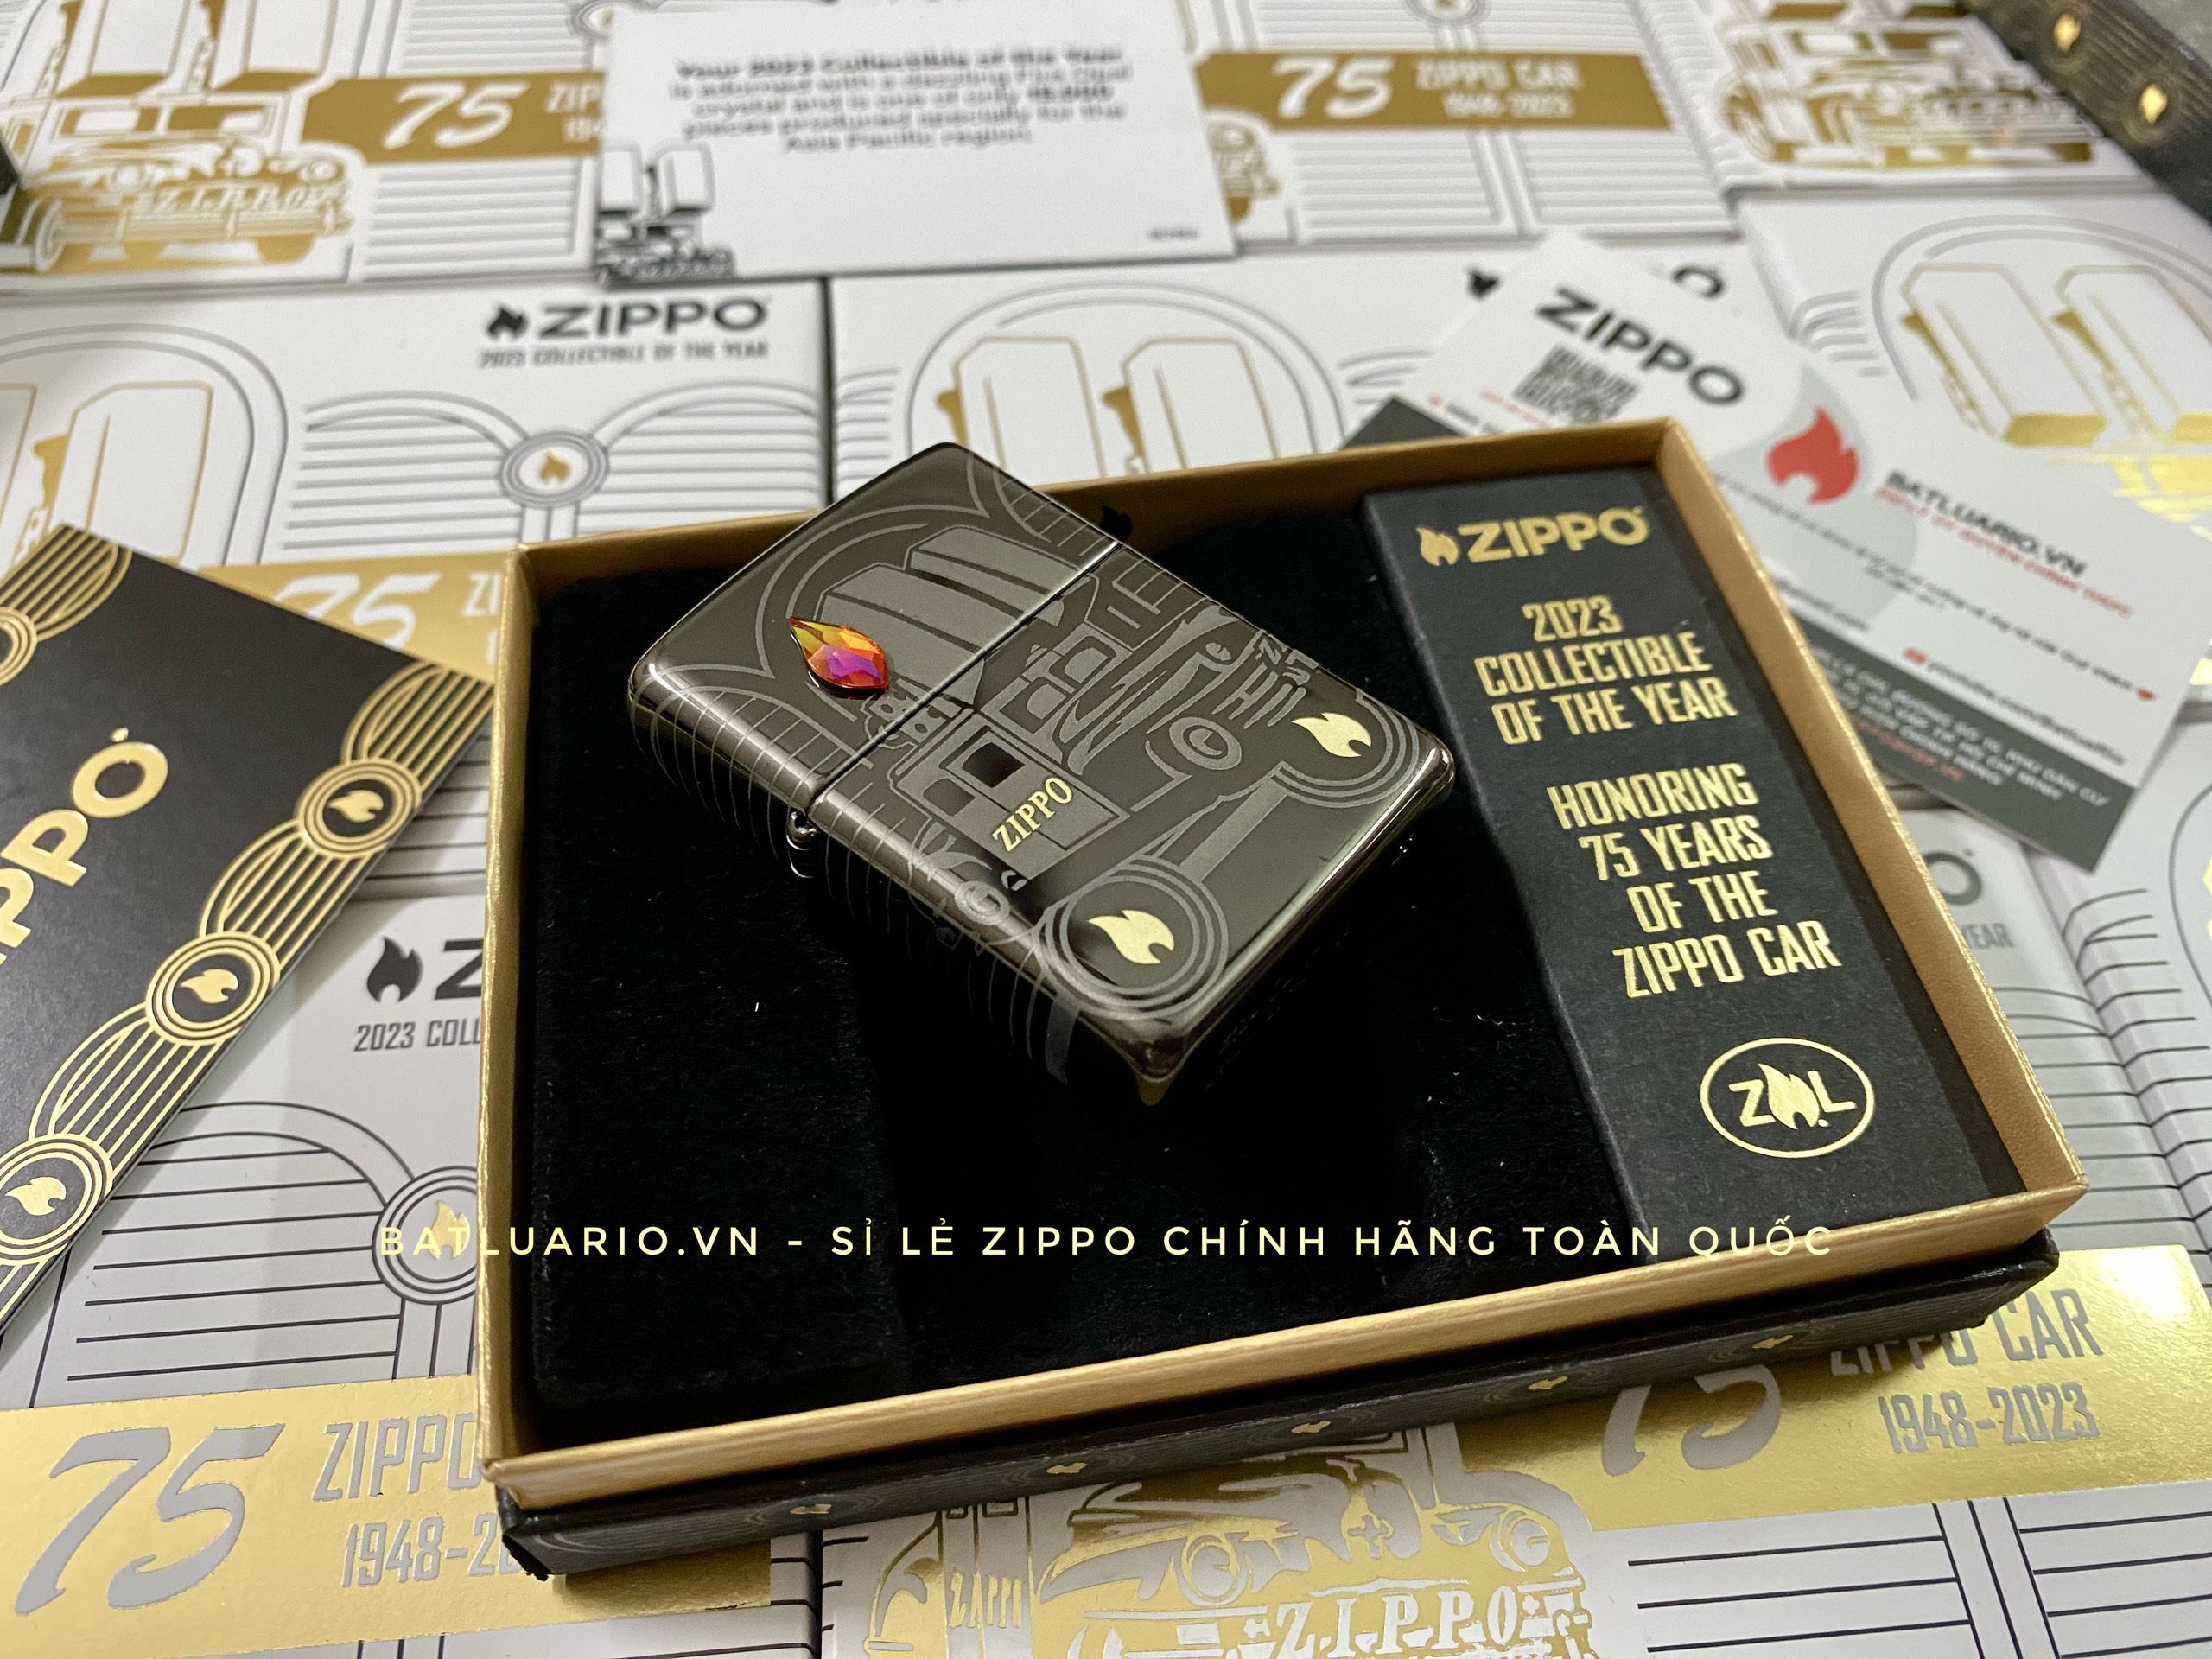 Zippo 48692 - Zippo 2023 Collectible Of The Year - Zippo Car 75th Anniversary Asia Pacific Limited Edition - Zippo COTY 2023 - Honoring 75 Years Of The Zippo Car 67